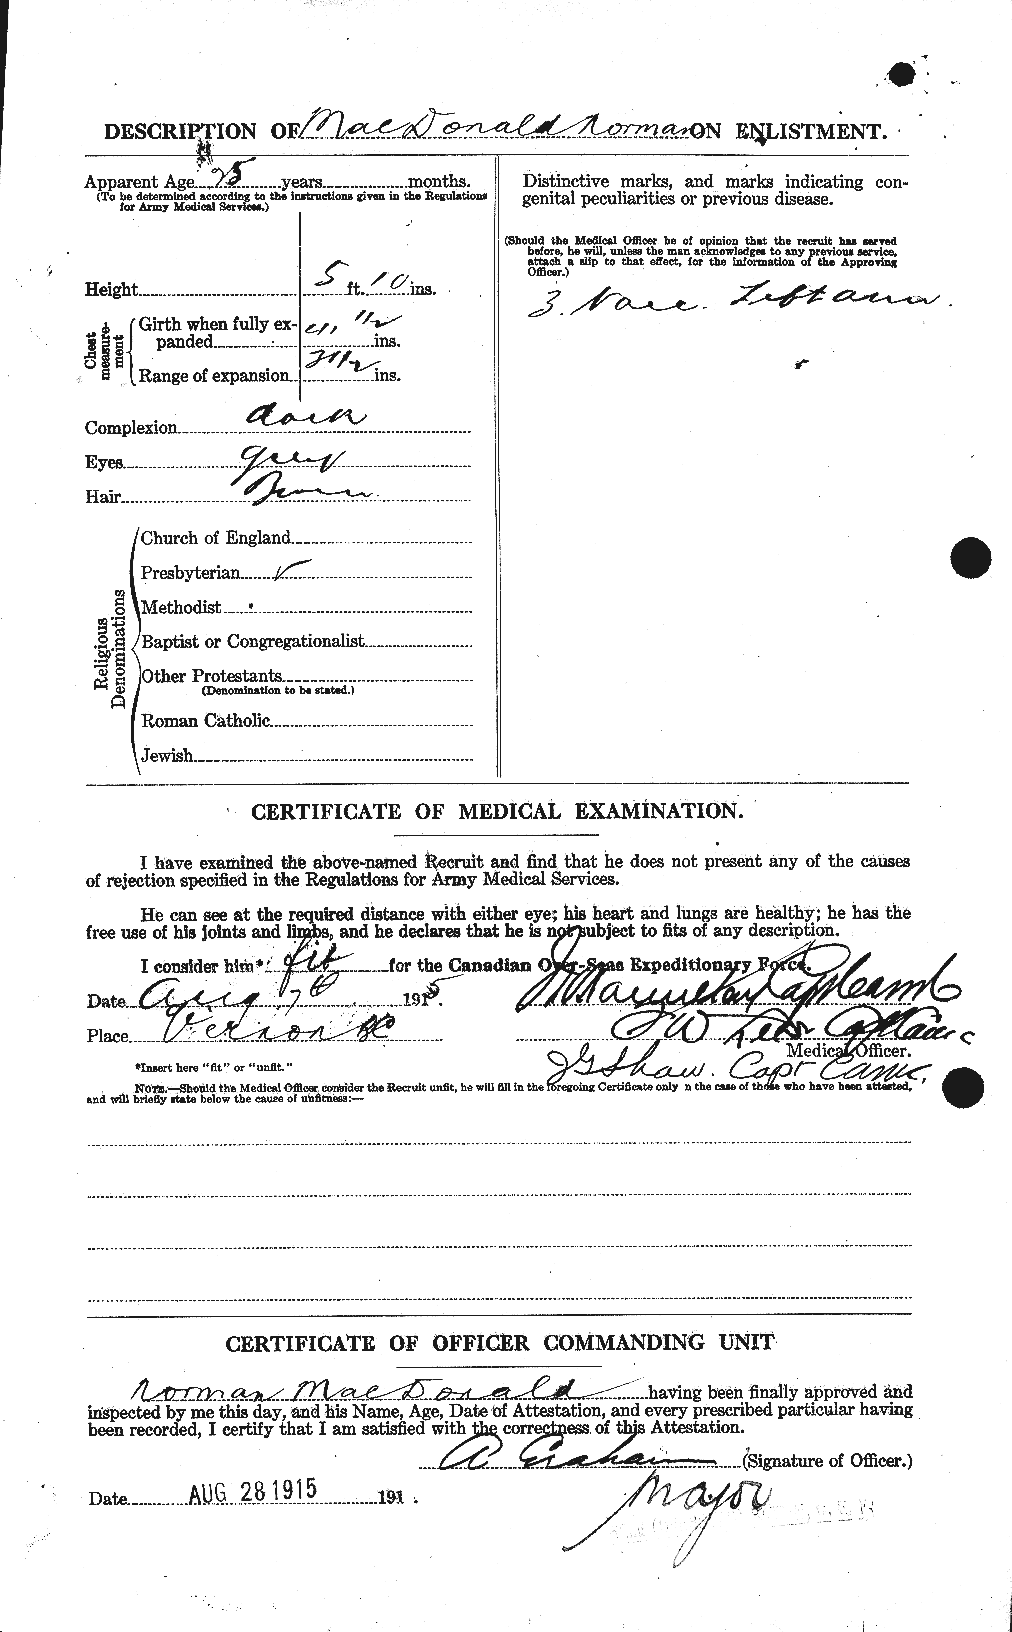 Personnel Records of the First World War - CEF 524690b